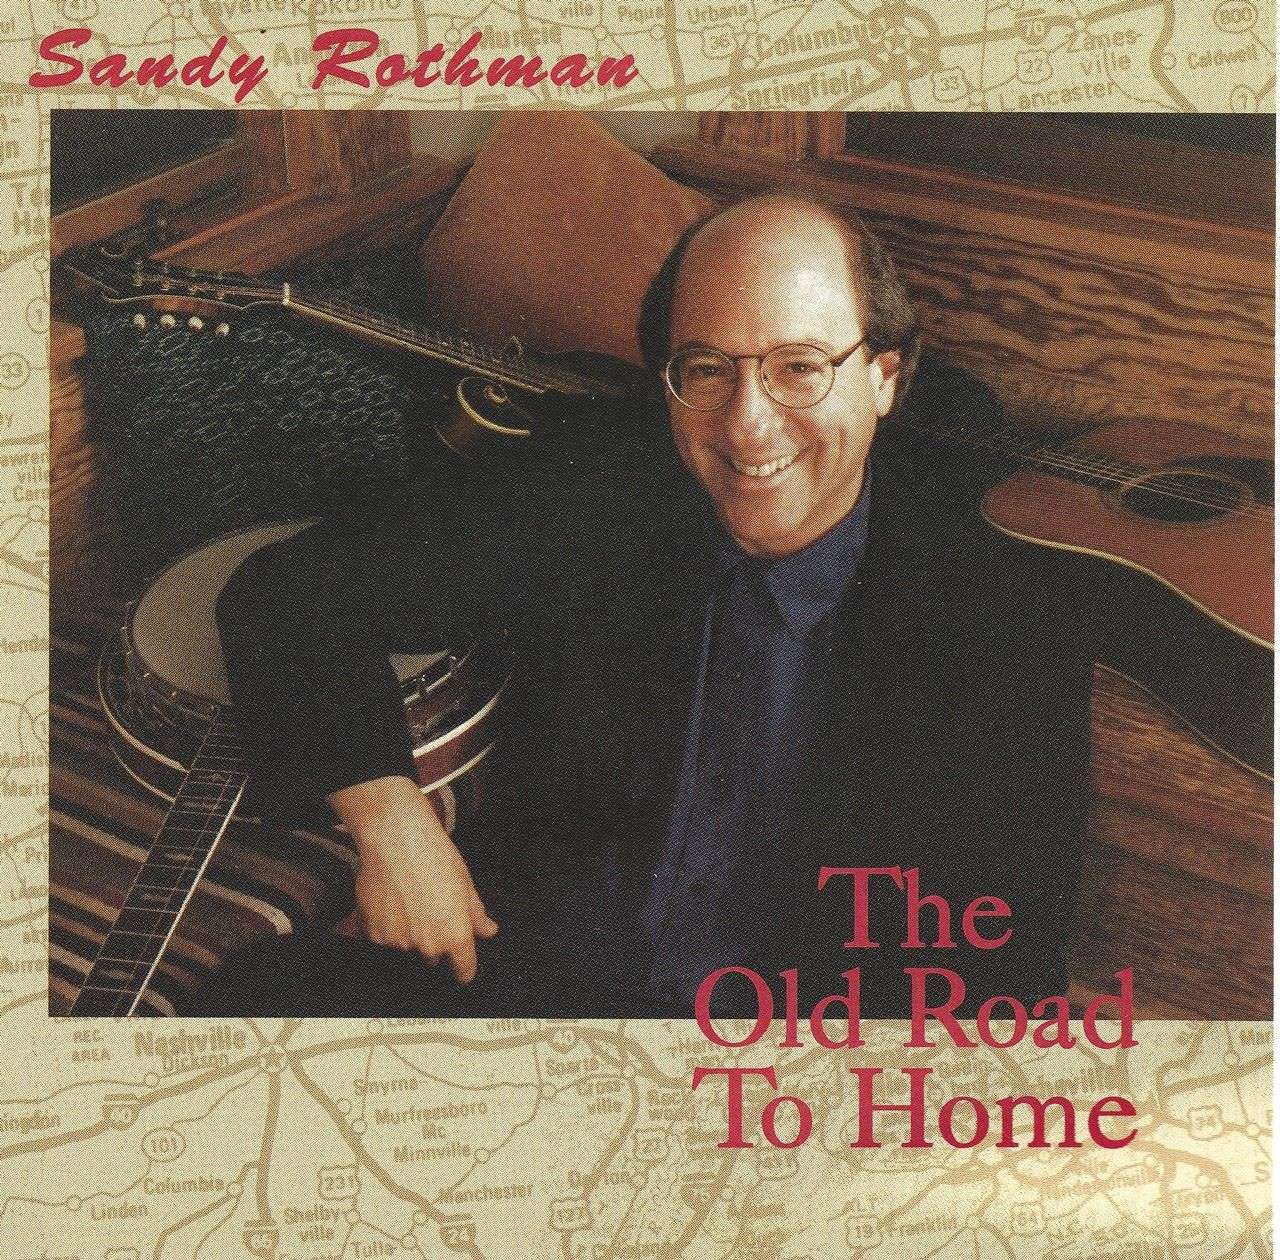 Sandy Rothman – The Old Road To Home cover album